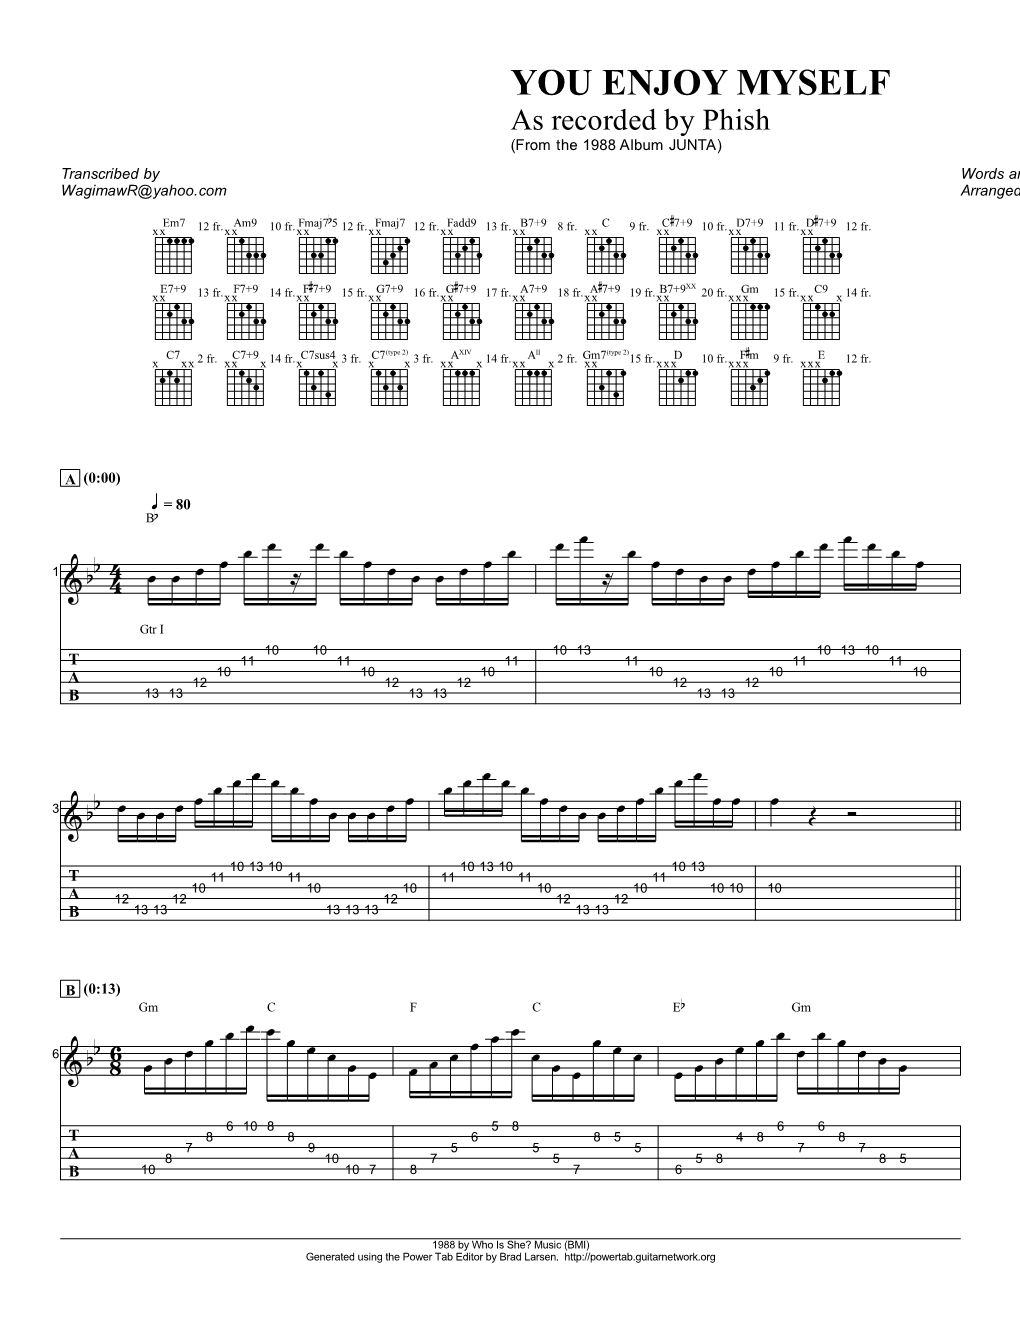 Phish (From the 1988 Album JUNTA) Transcribed by Words and Music by Trey Anastasio Wagimawr@Yahoo.Com Arranged by Chris Amelar